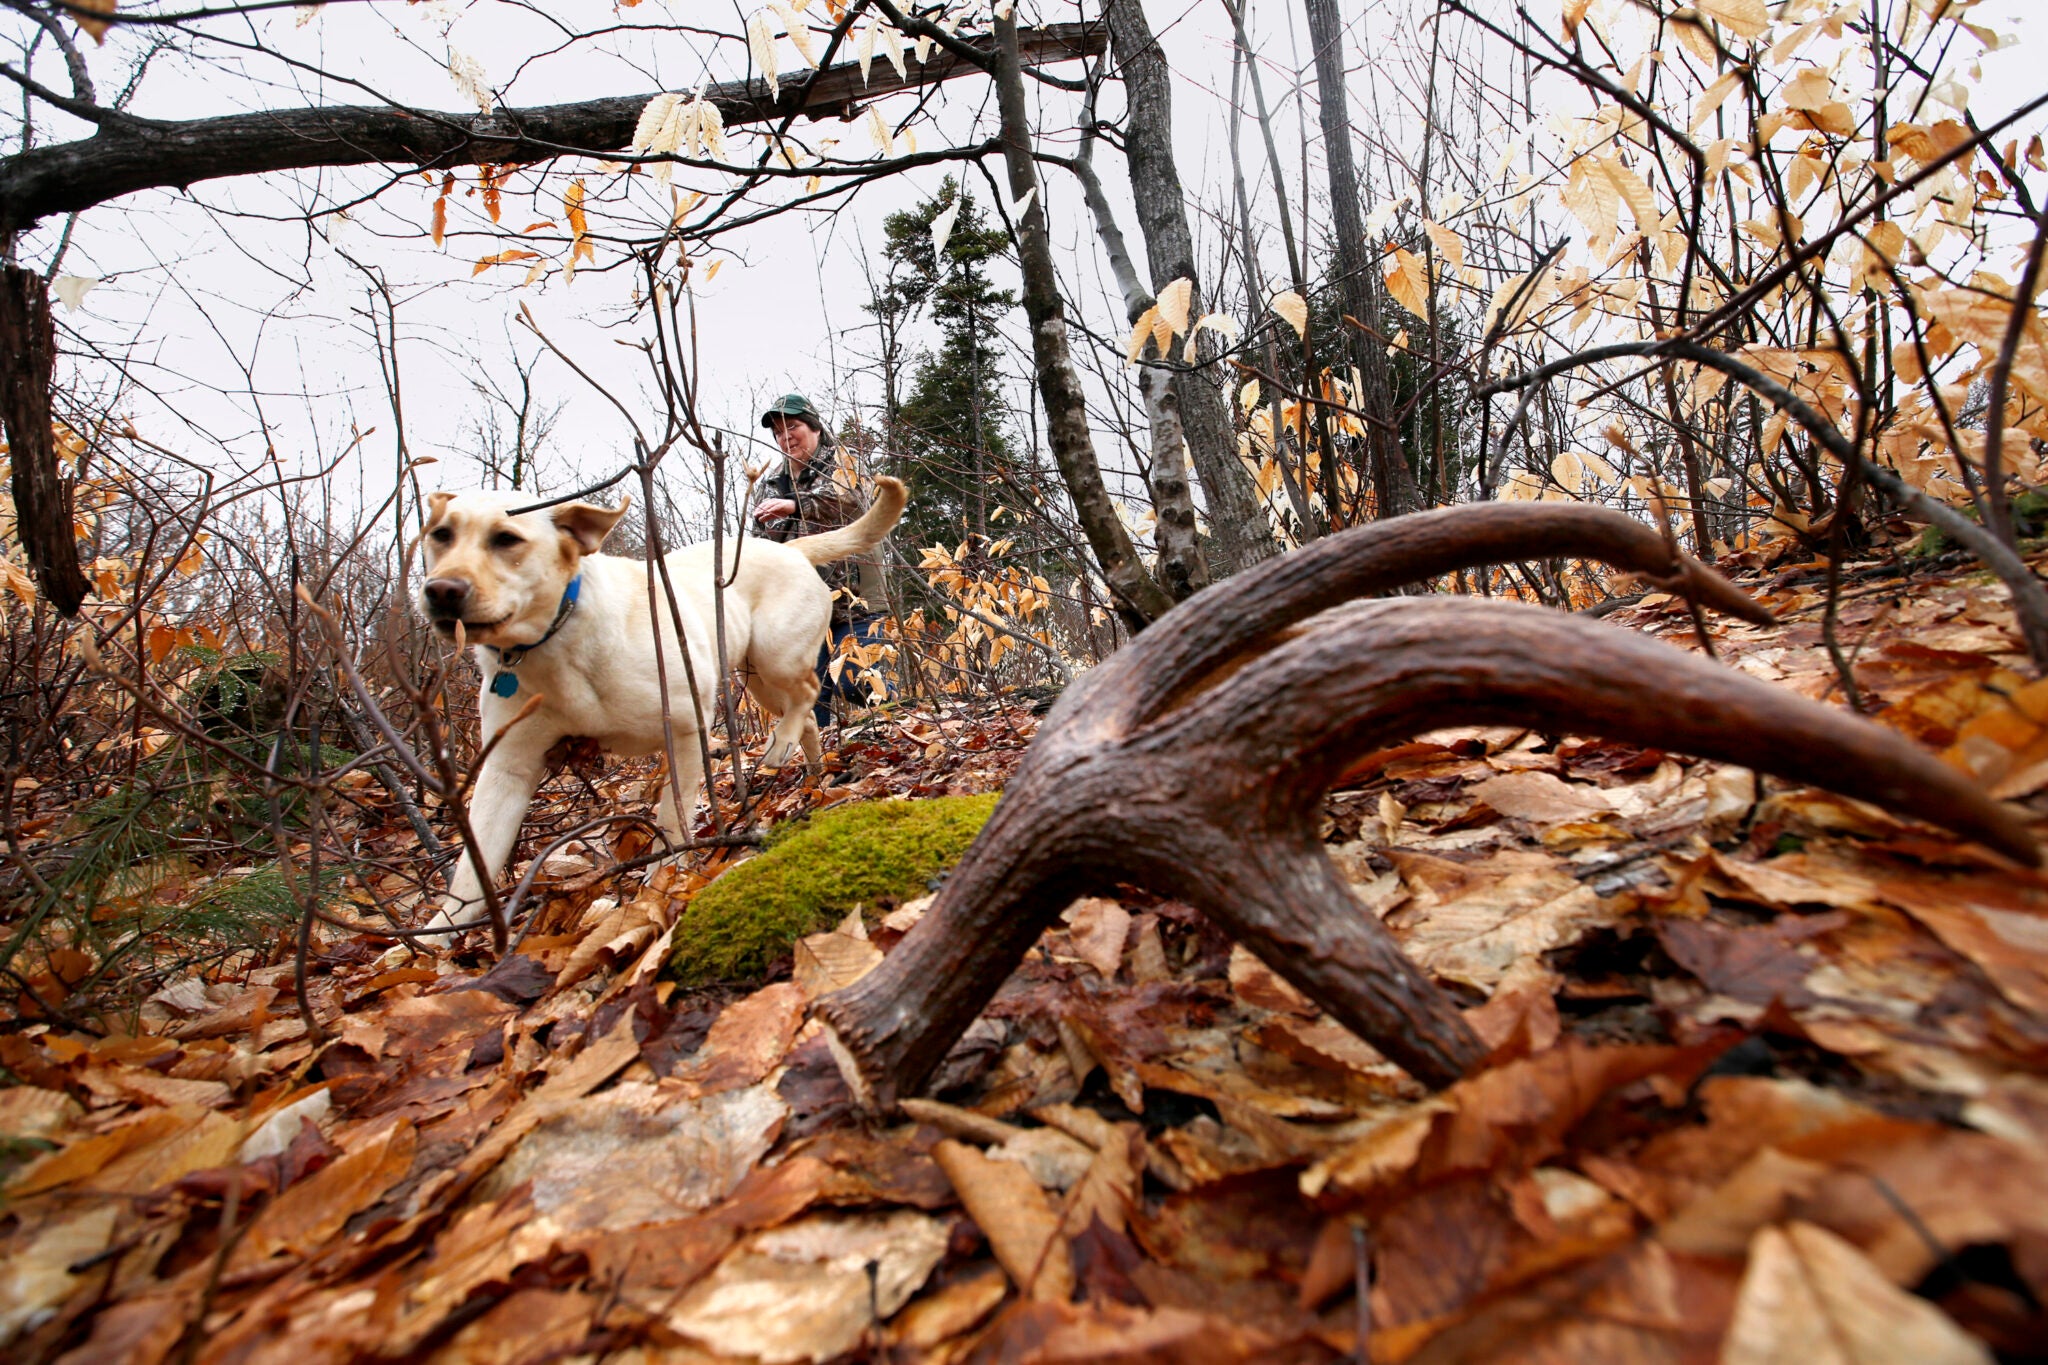 Shed Hunting 101: Expert Tips for Finding More Antlers This Spring